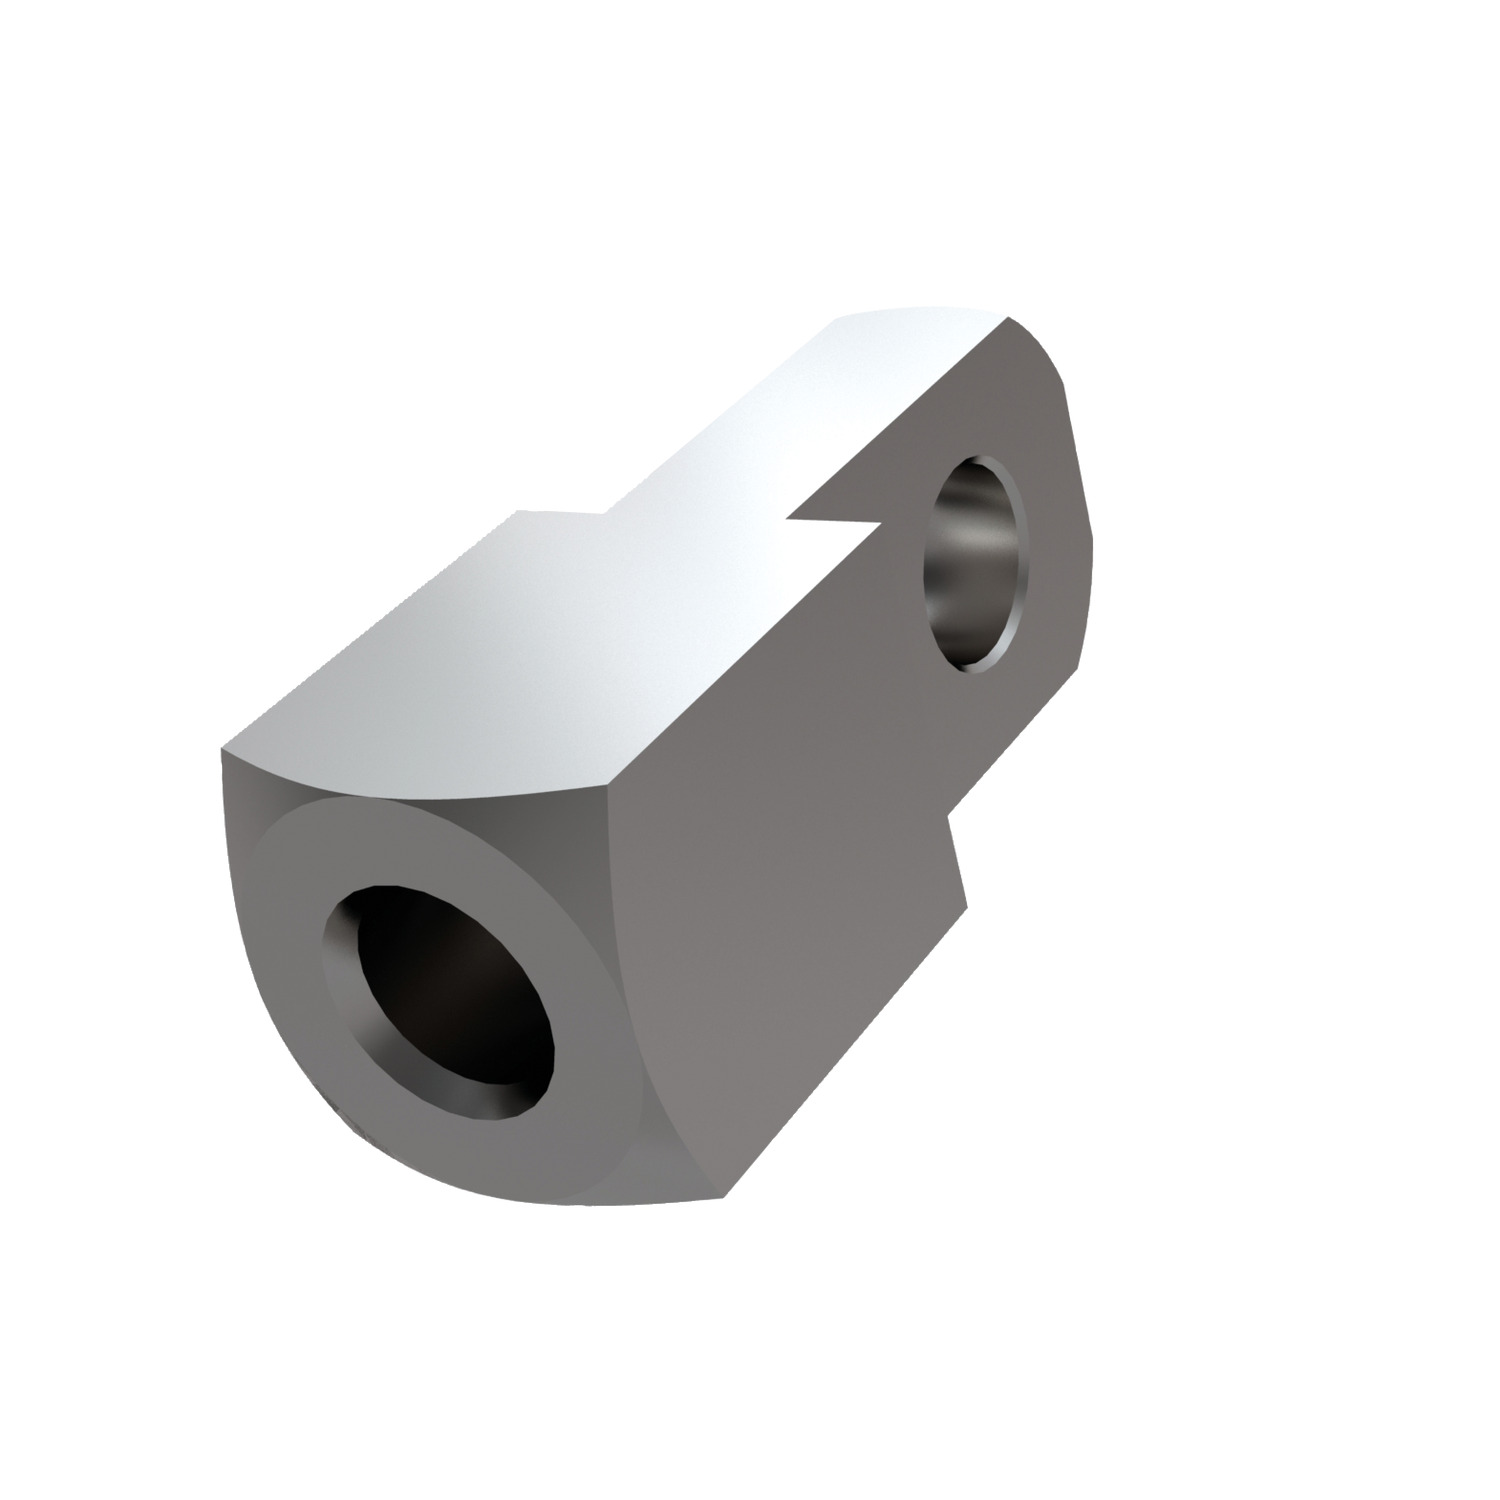 R3426 - Stainless Mating Piece for Clevis Joints